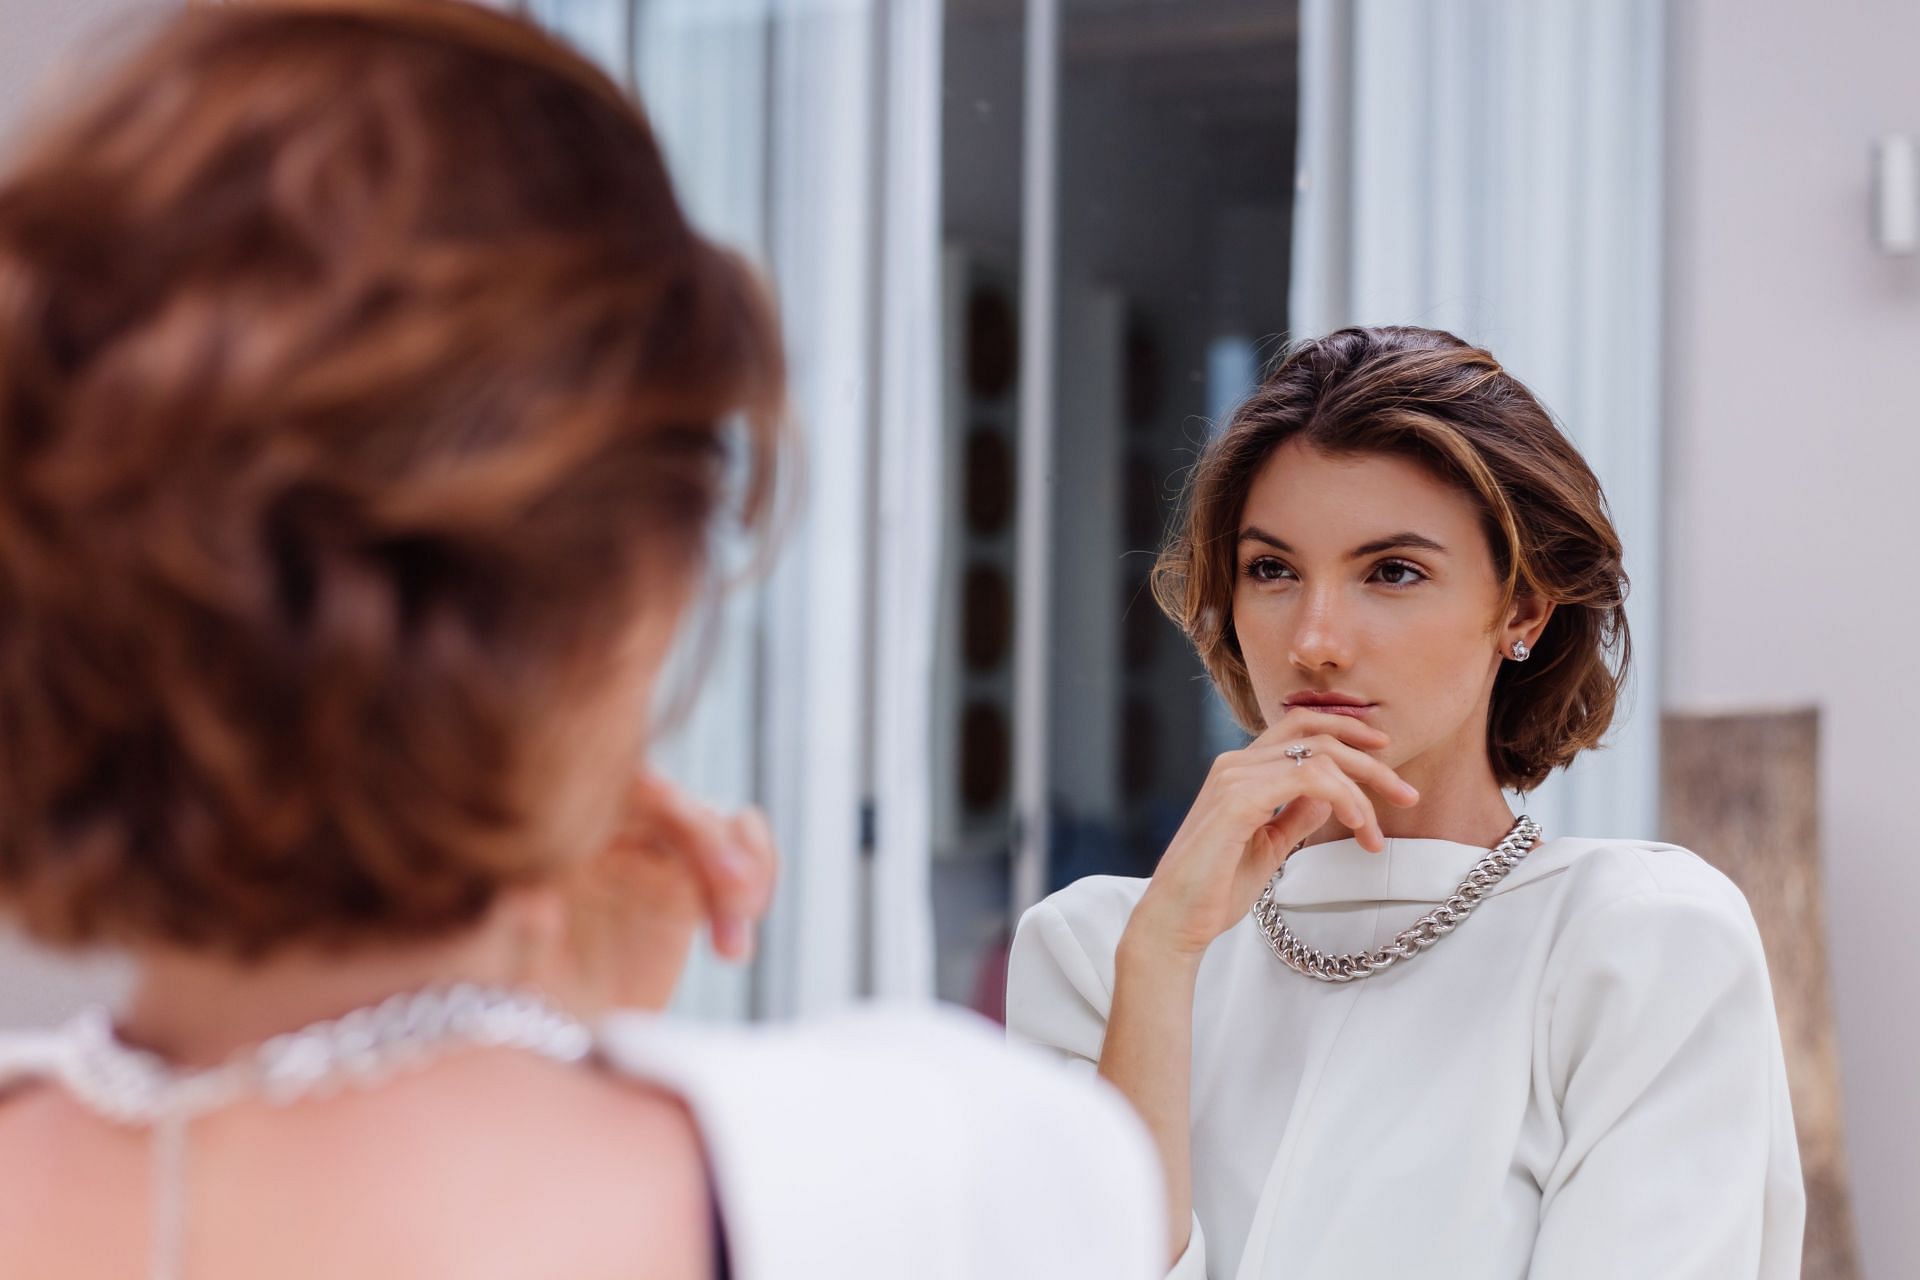 What are the signs to detect vulnerable narcissism? (Image via Freepik/ Freepik)